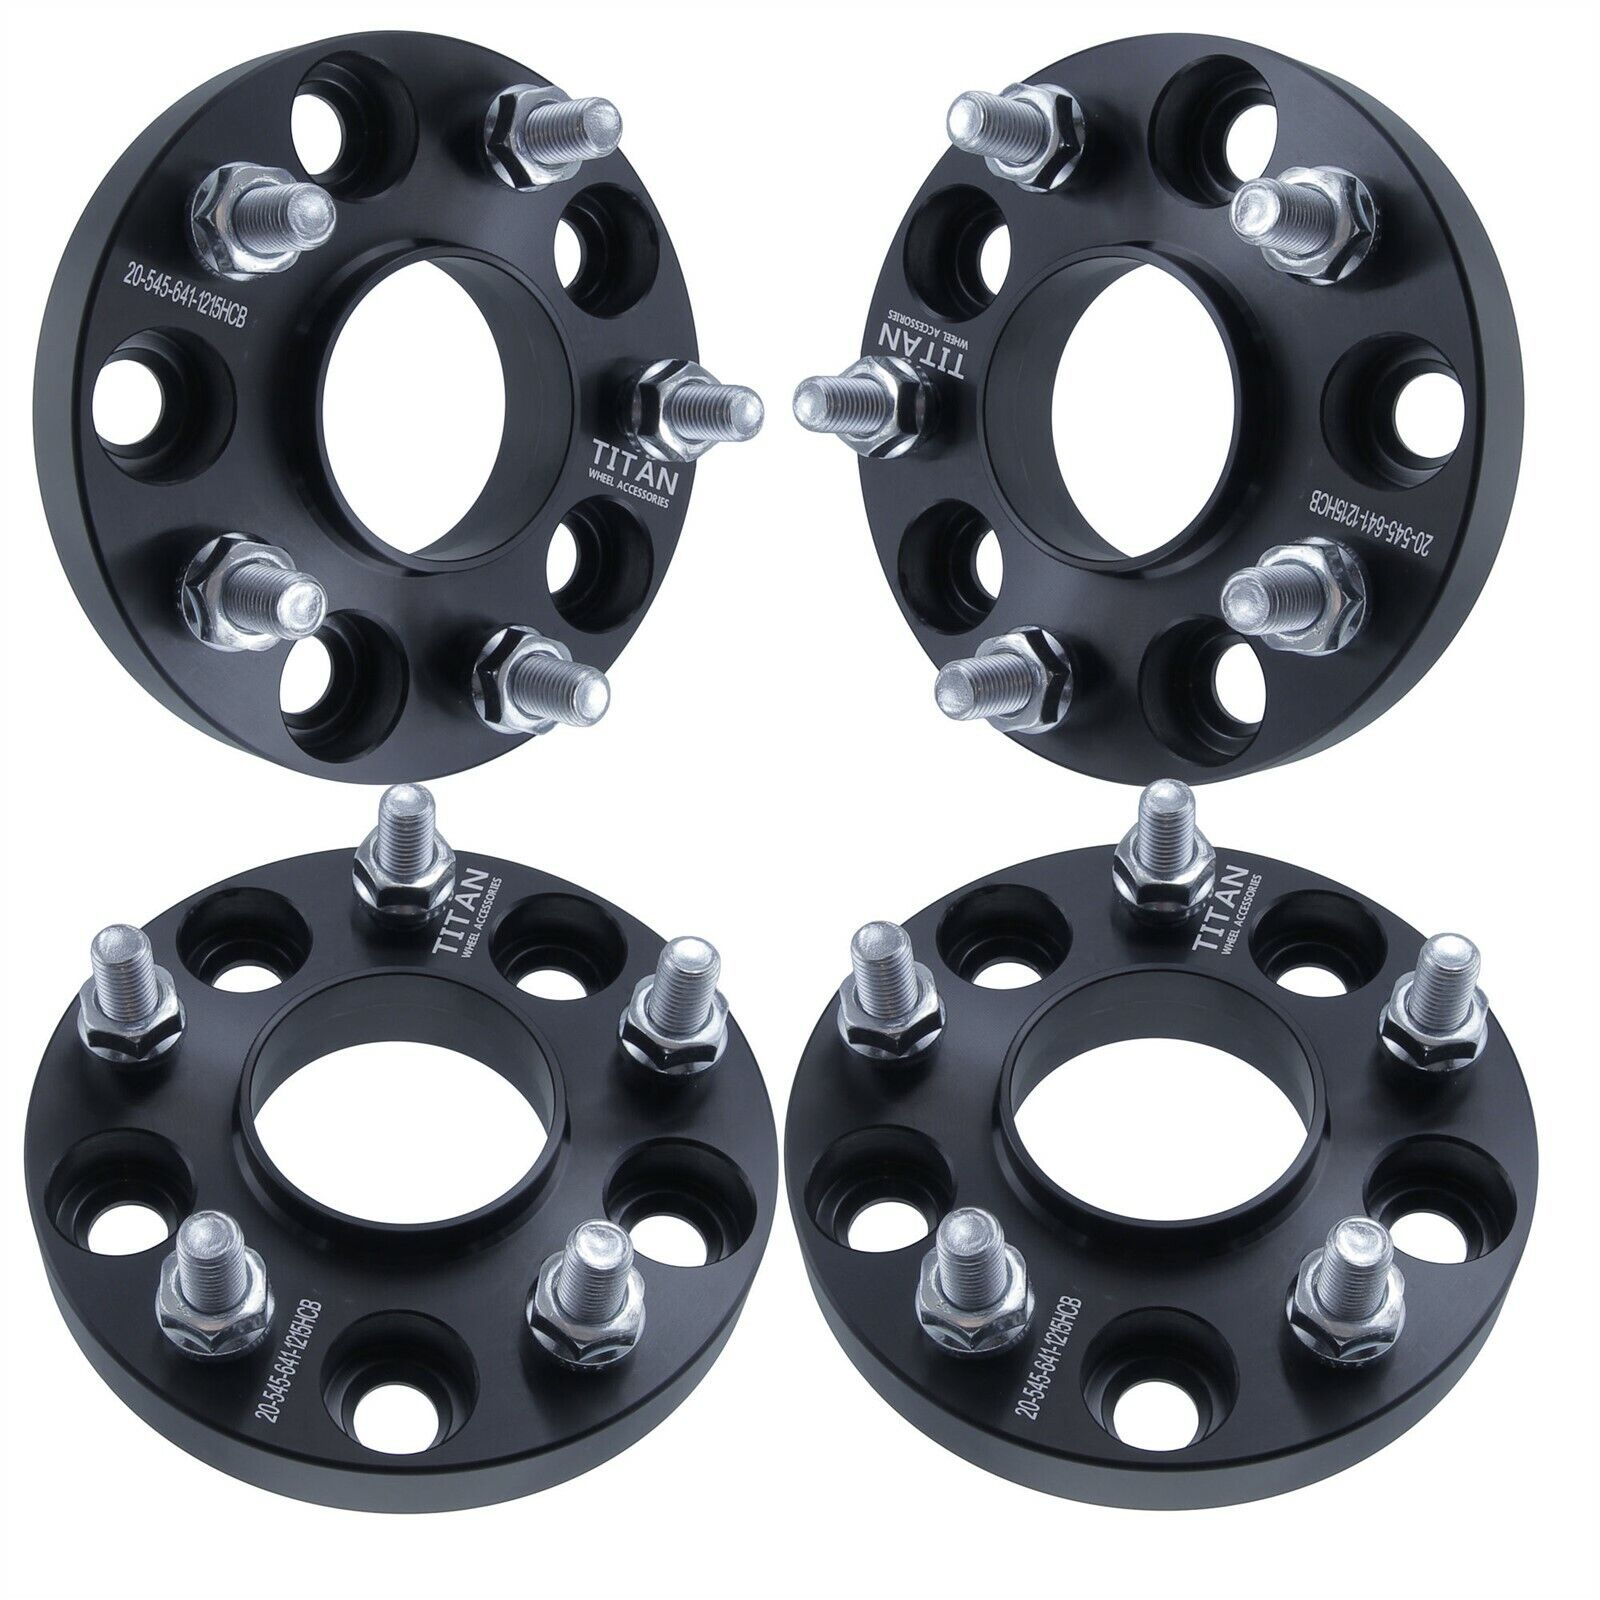 5x114.3 Hubcentric Wheel Spacers | fits Prelude Civic Accord 5x114.3 64 ...